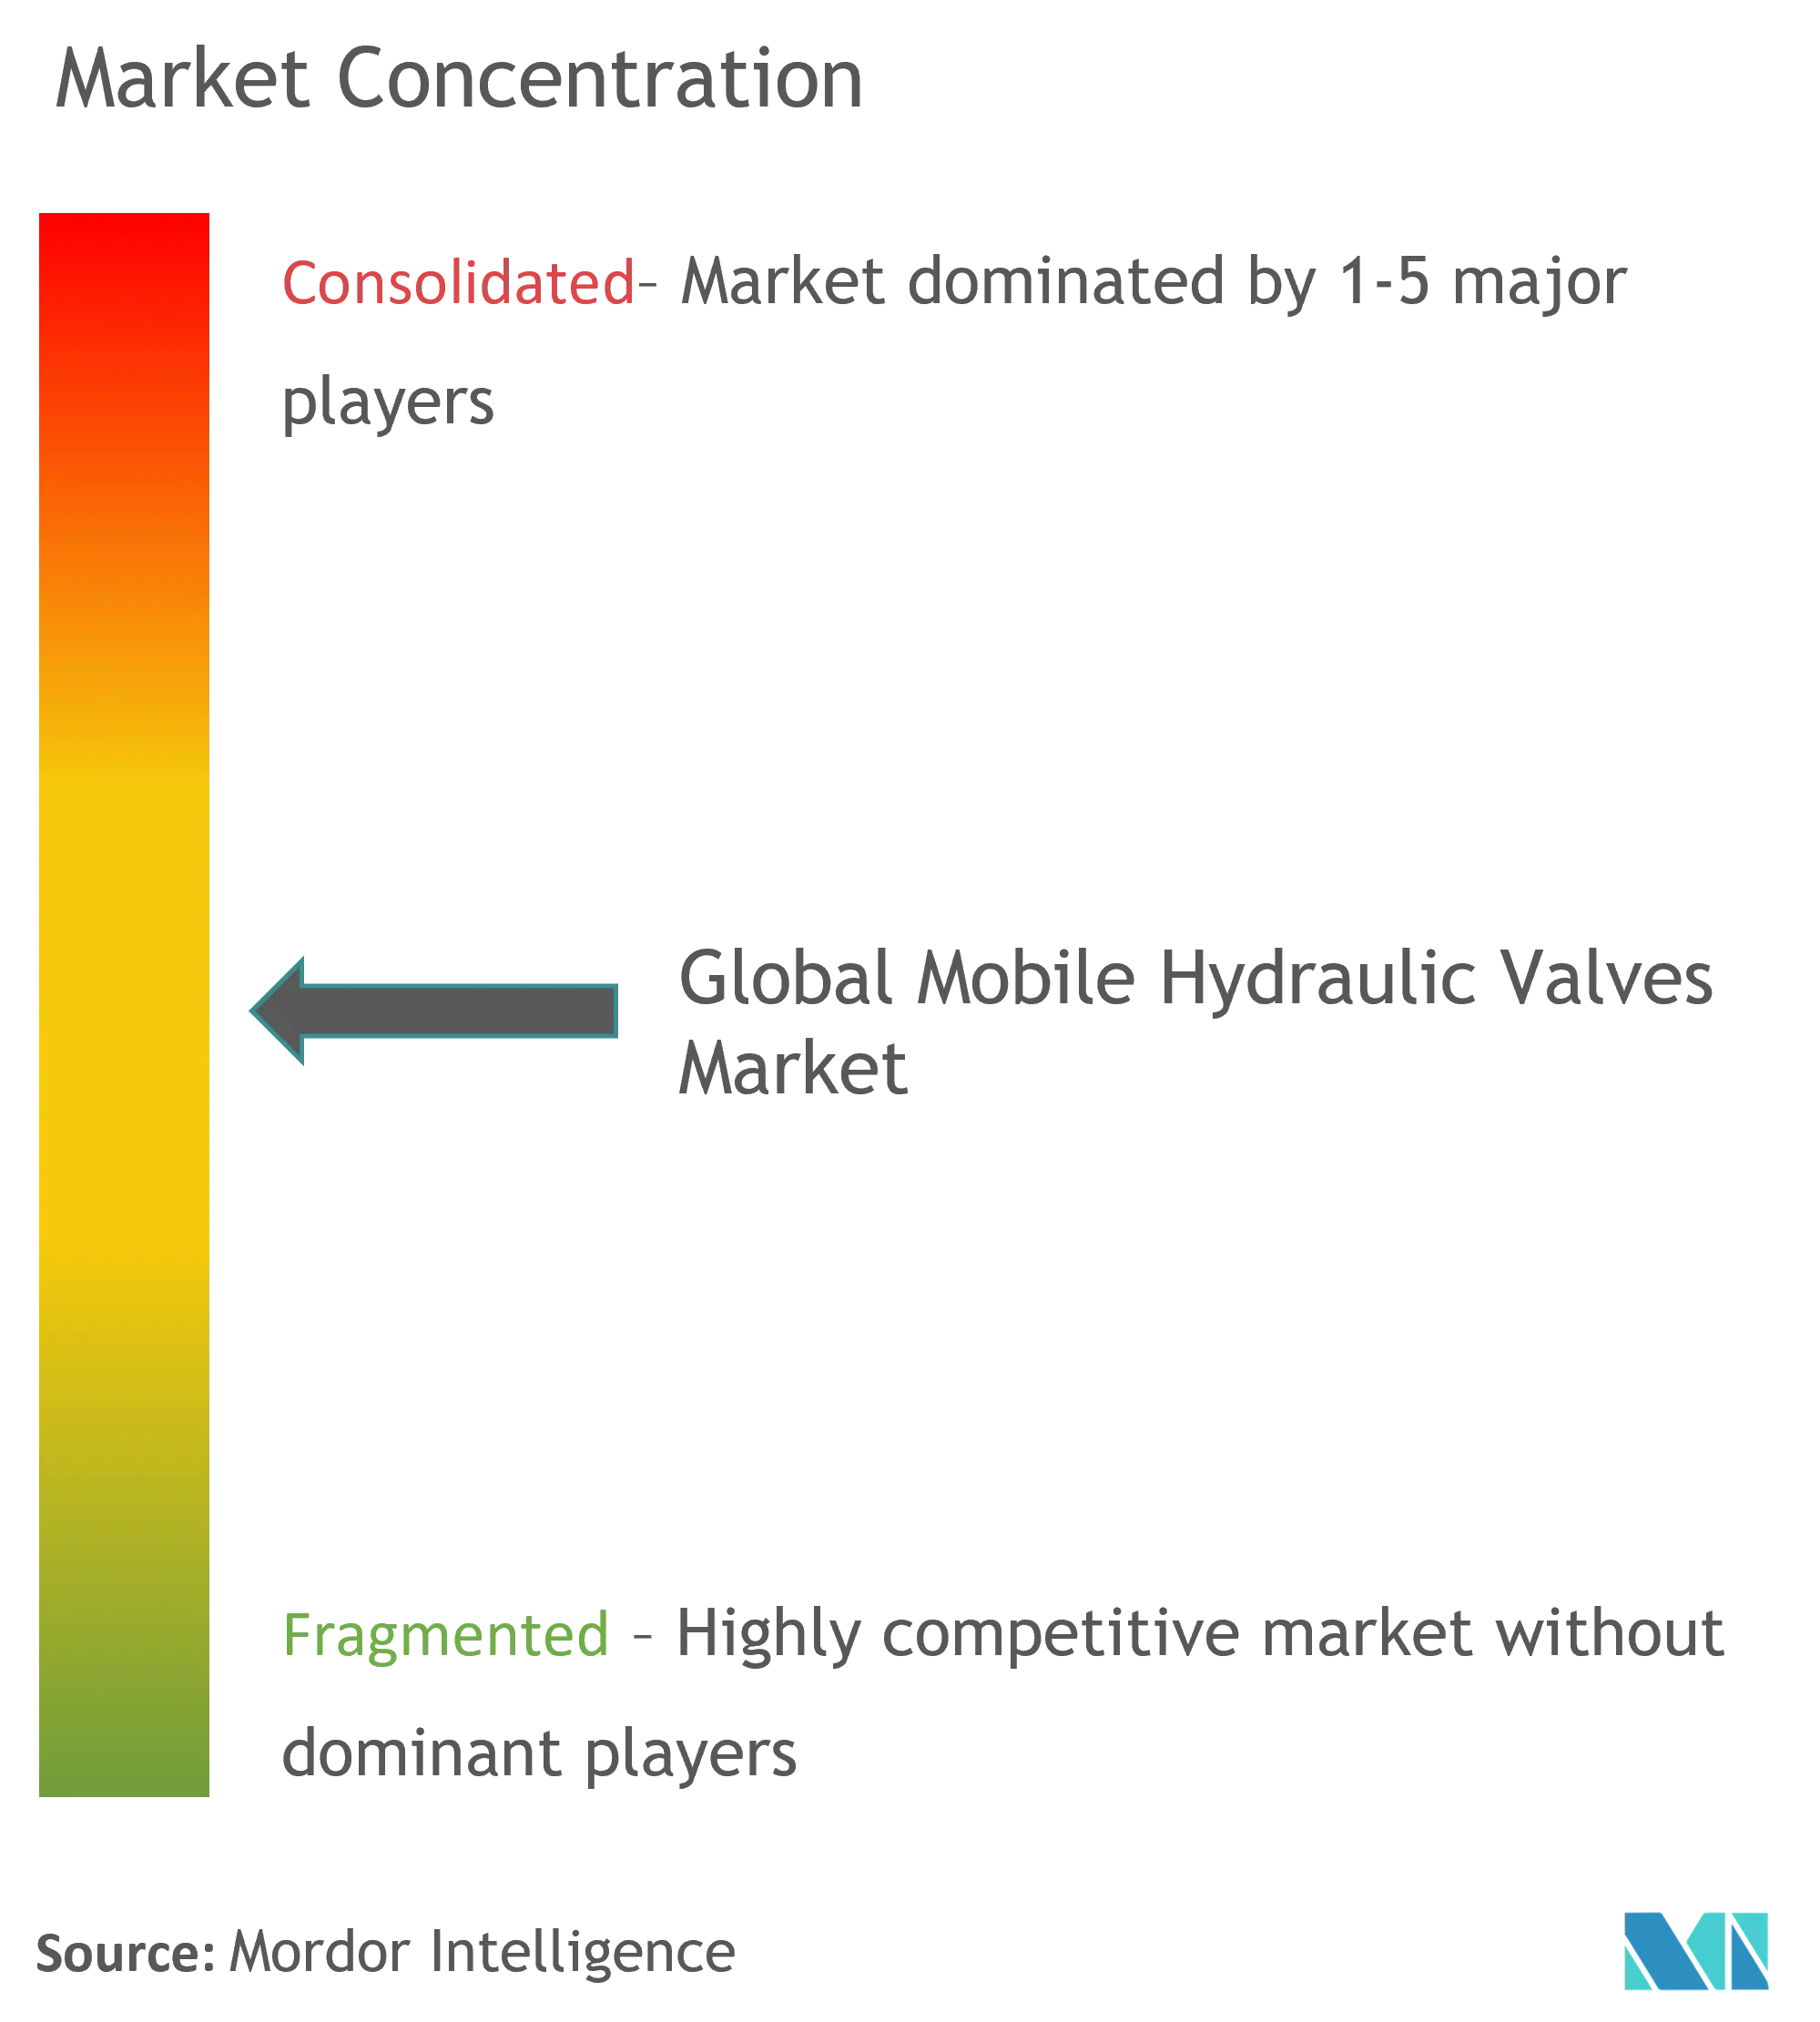 Mobile Hydraulic Valves Market Concentration